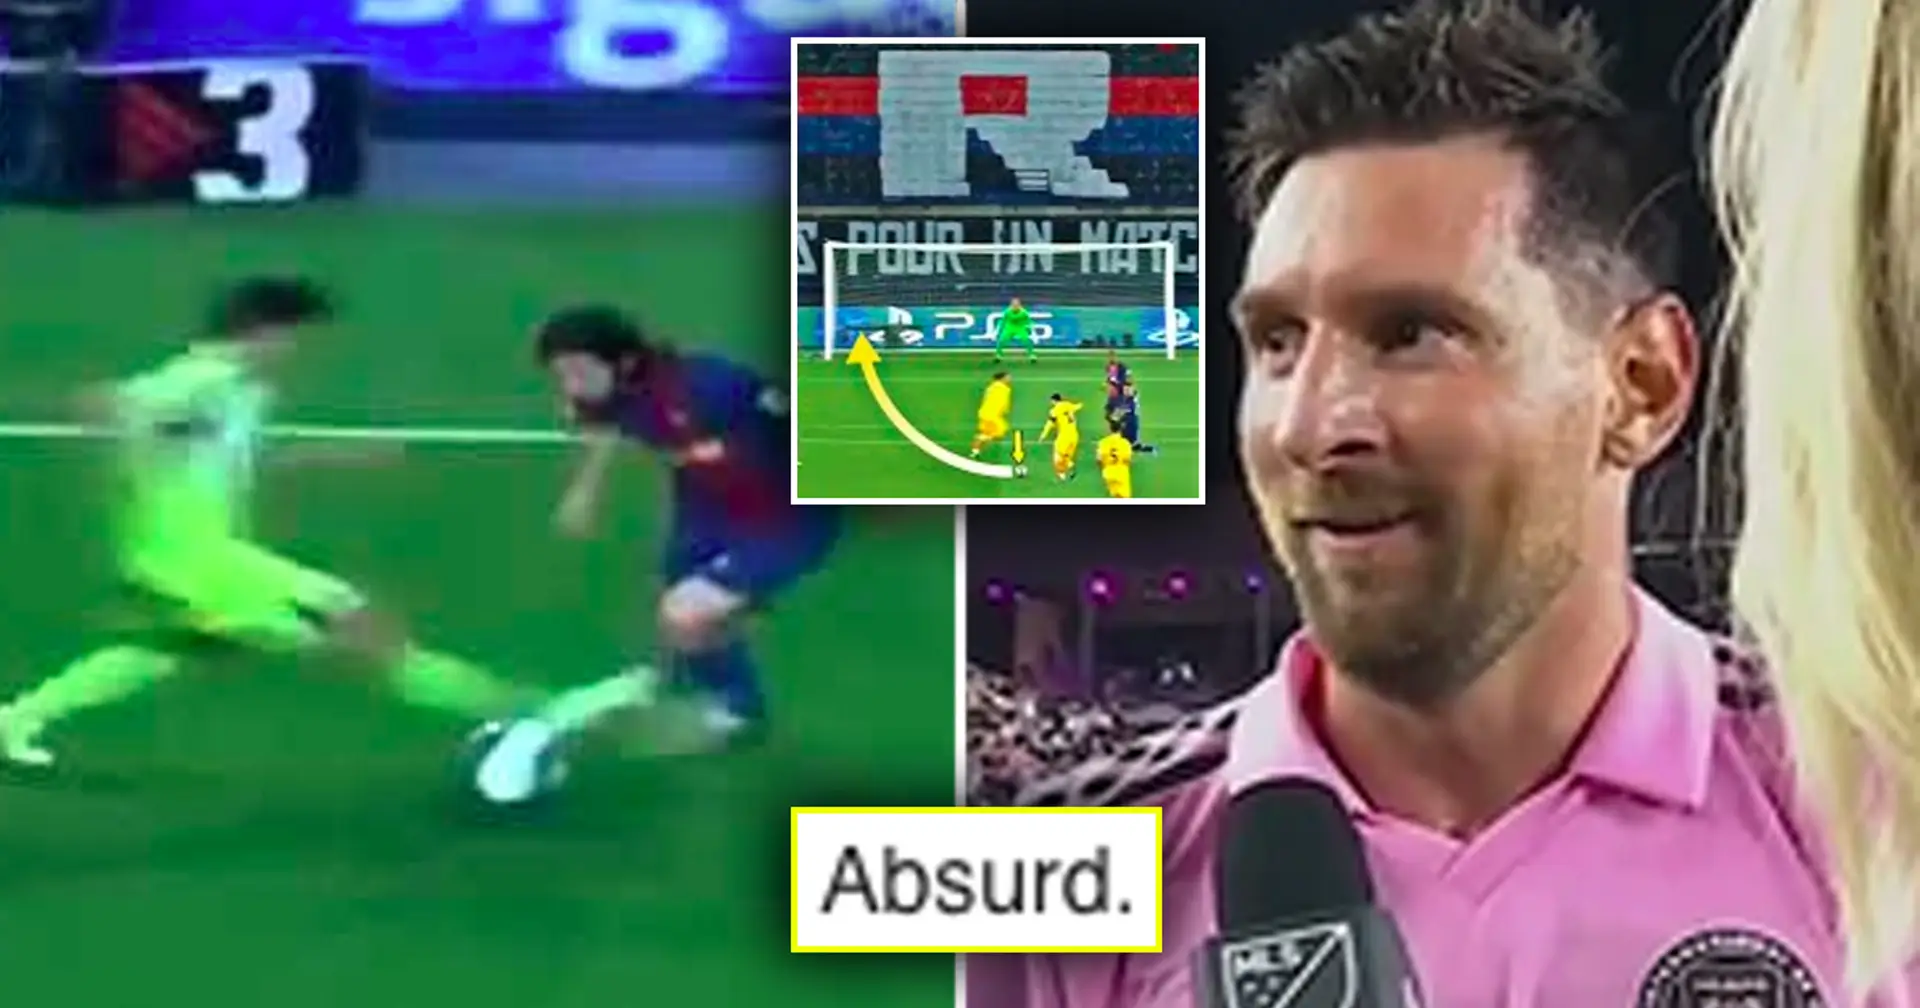 Fan grades ALL Messi goals based on difficulty, makes incredible conclusion